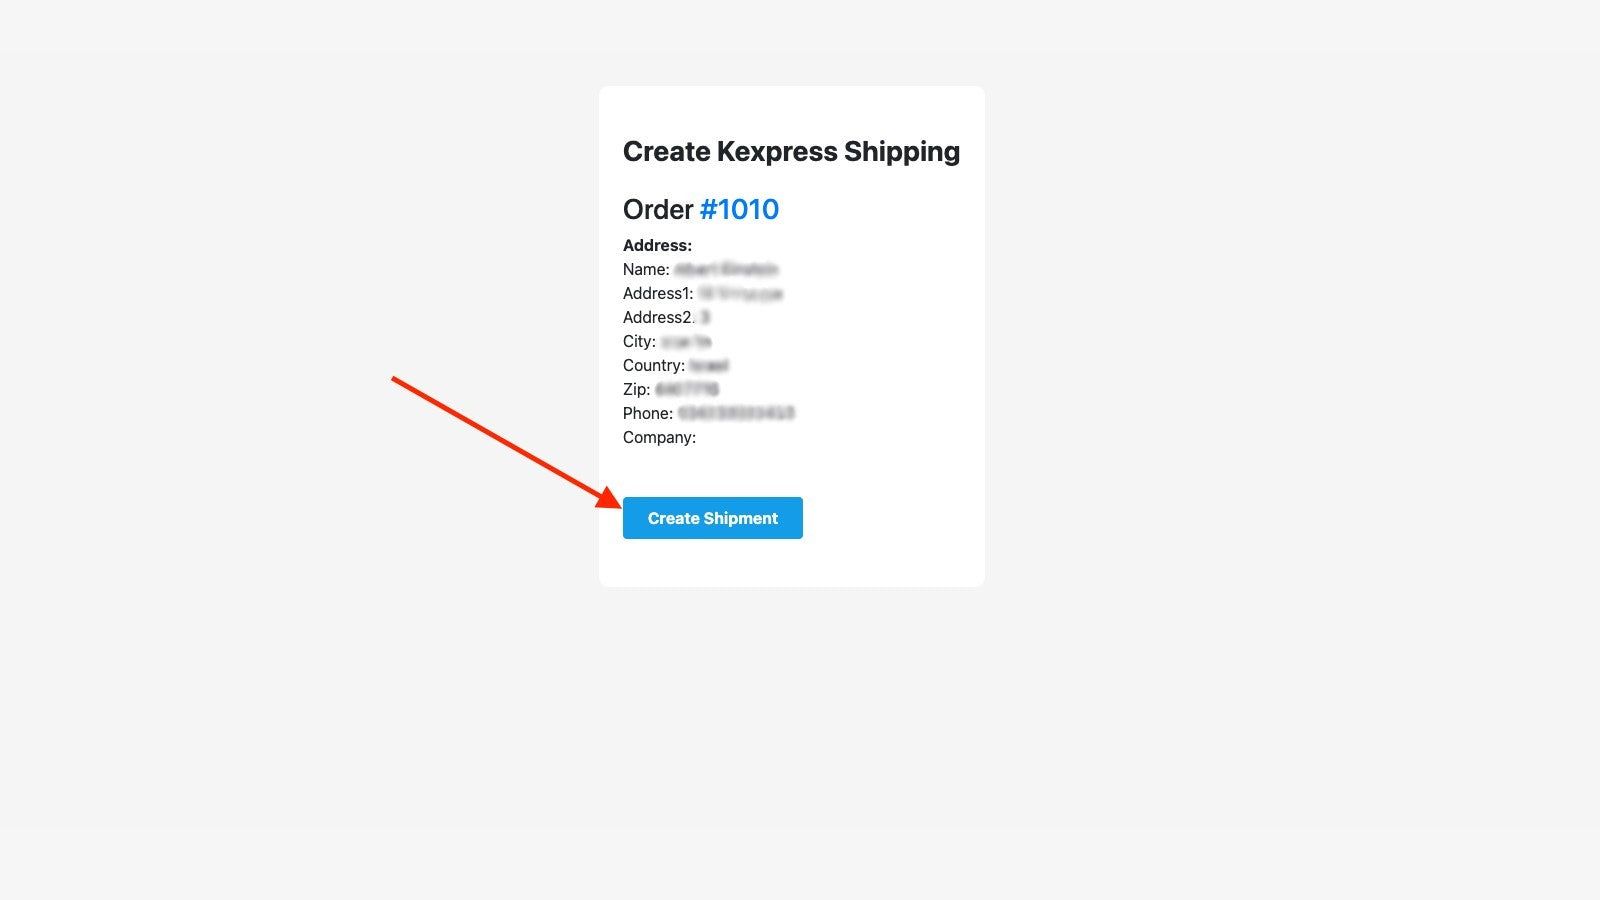 Create Kexpress shipments with the shopify order data